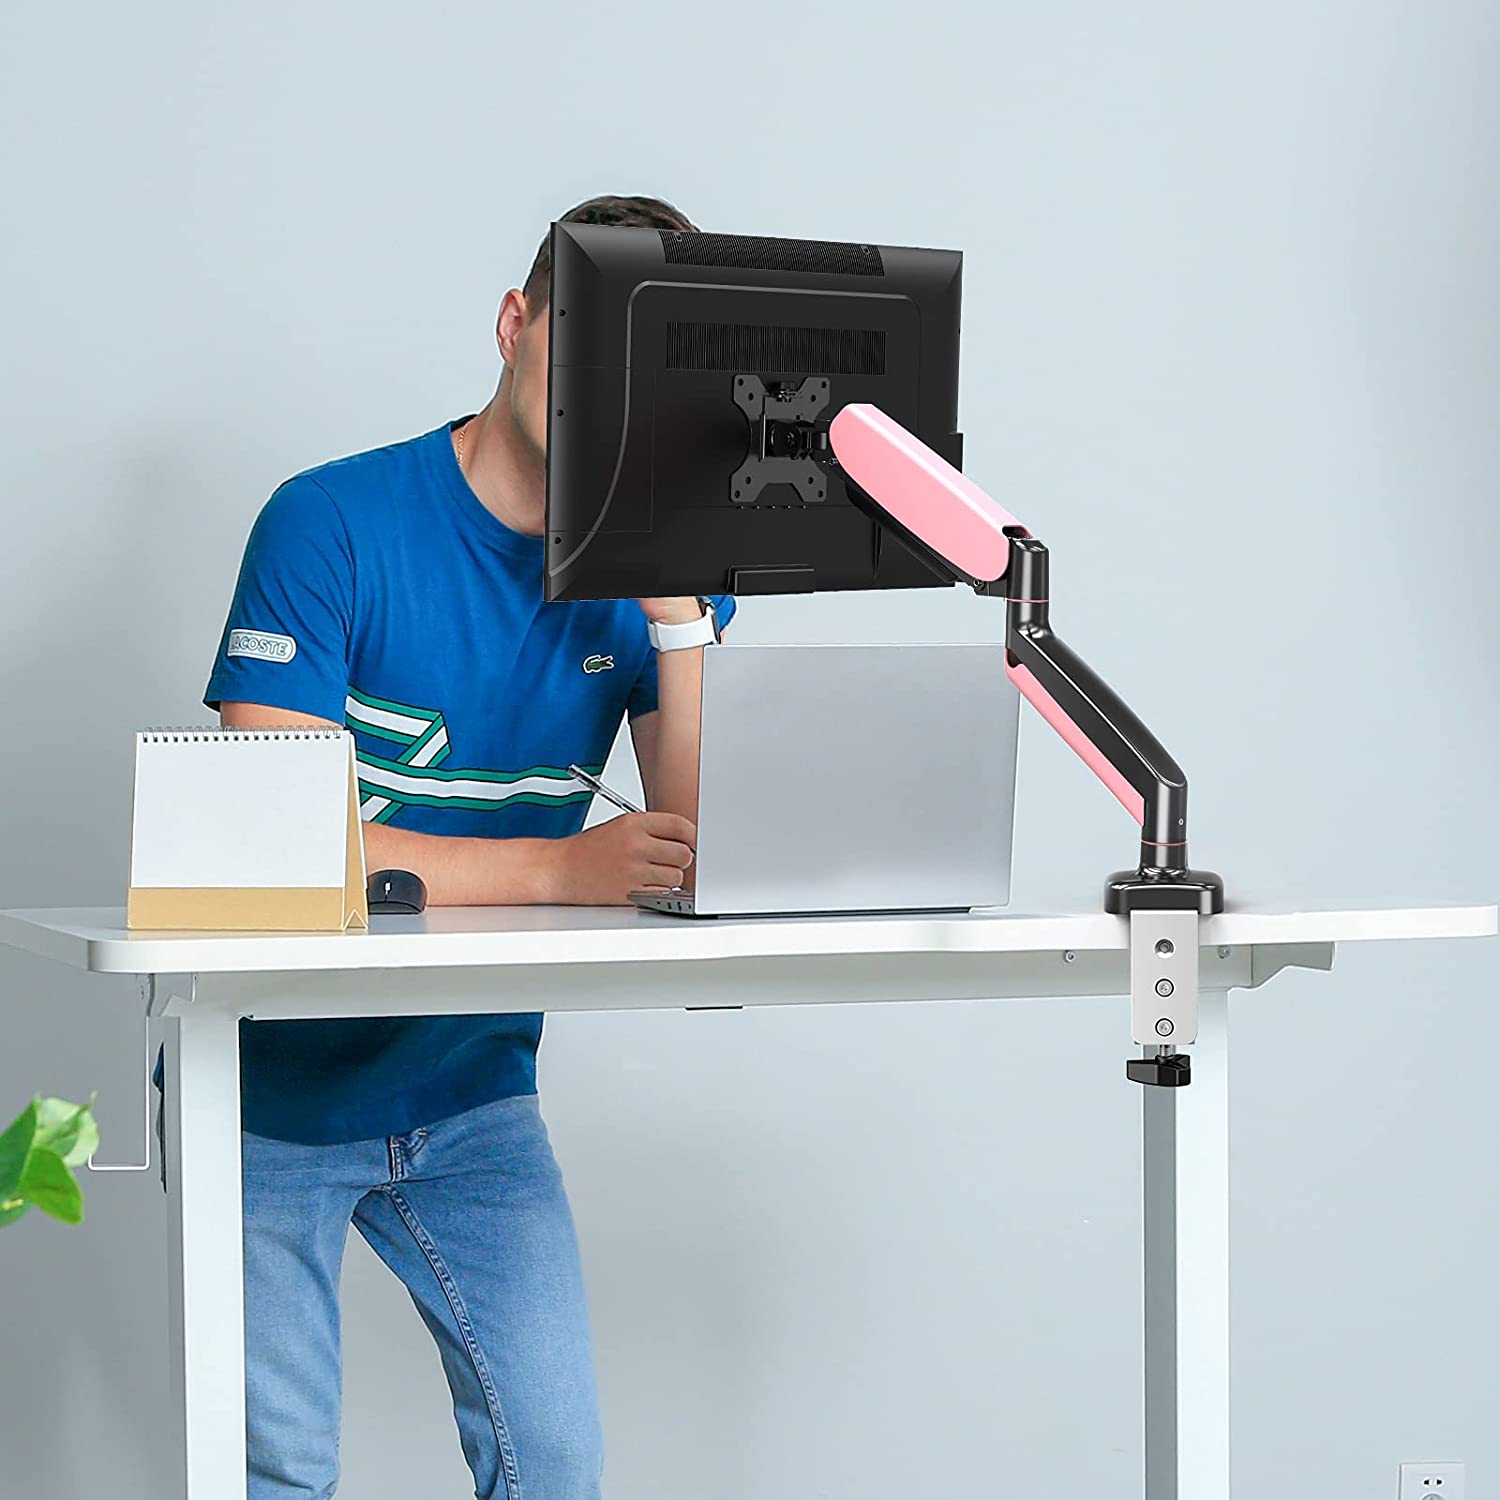 Single Arm pink monitor desk holder for home office or corporate office